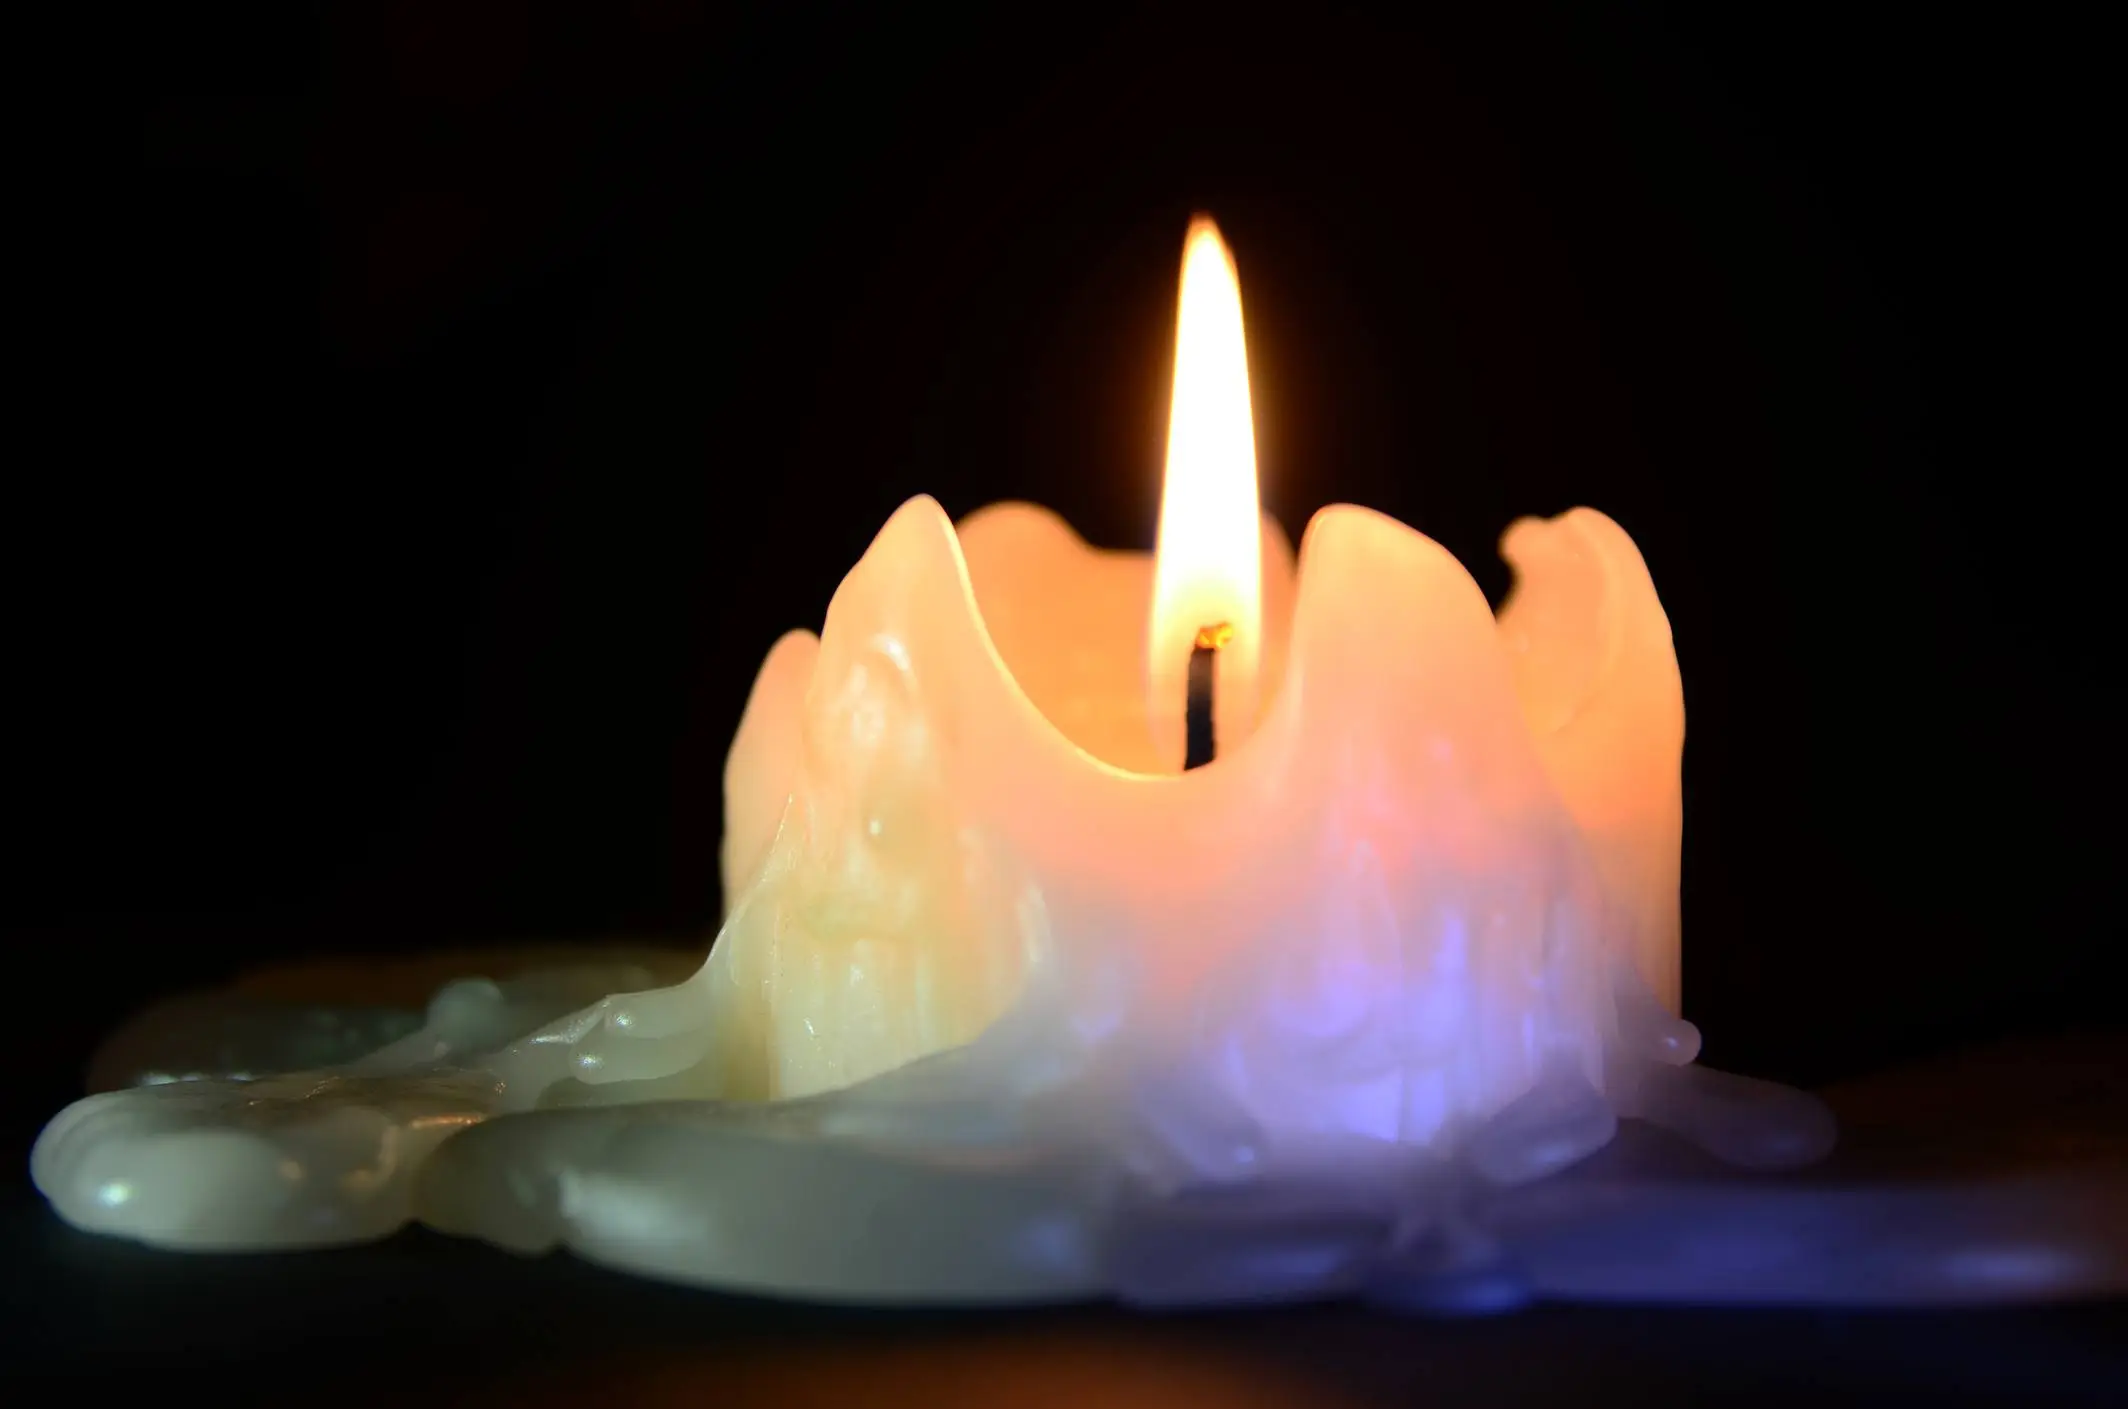 3 WAYS YOU’LL BENEFIT FROM BURNING CANDLES